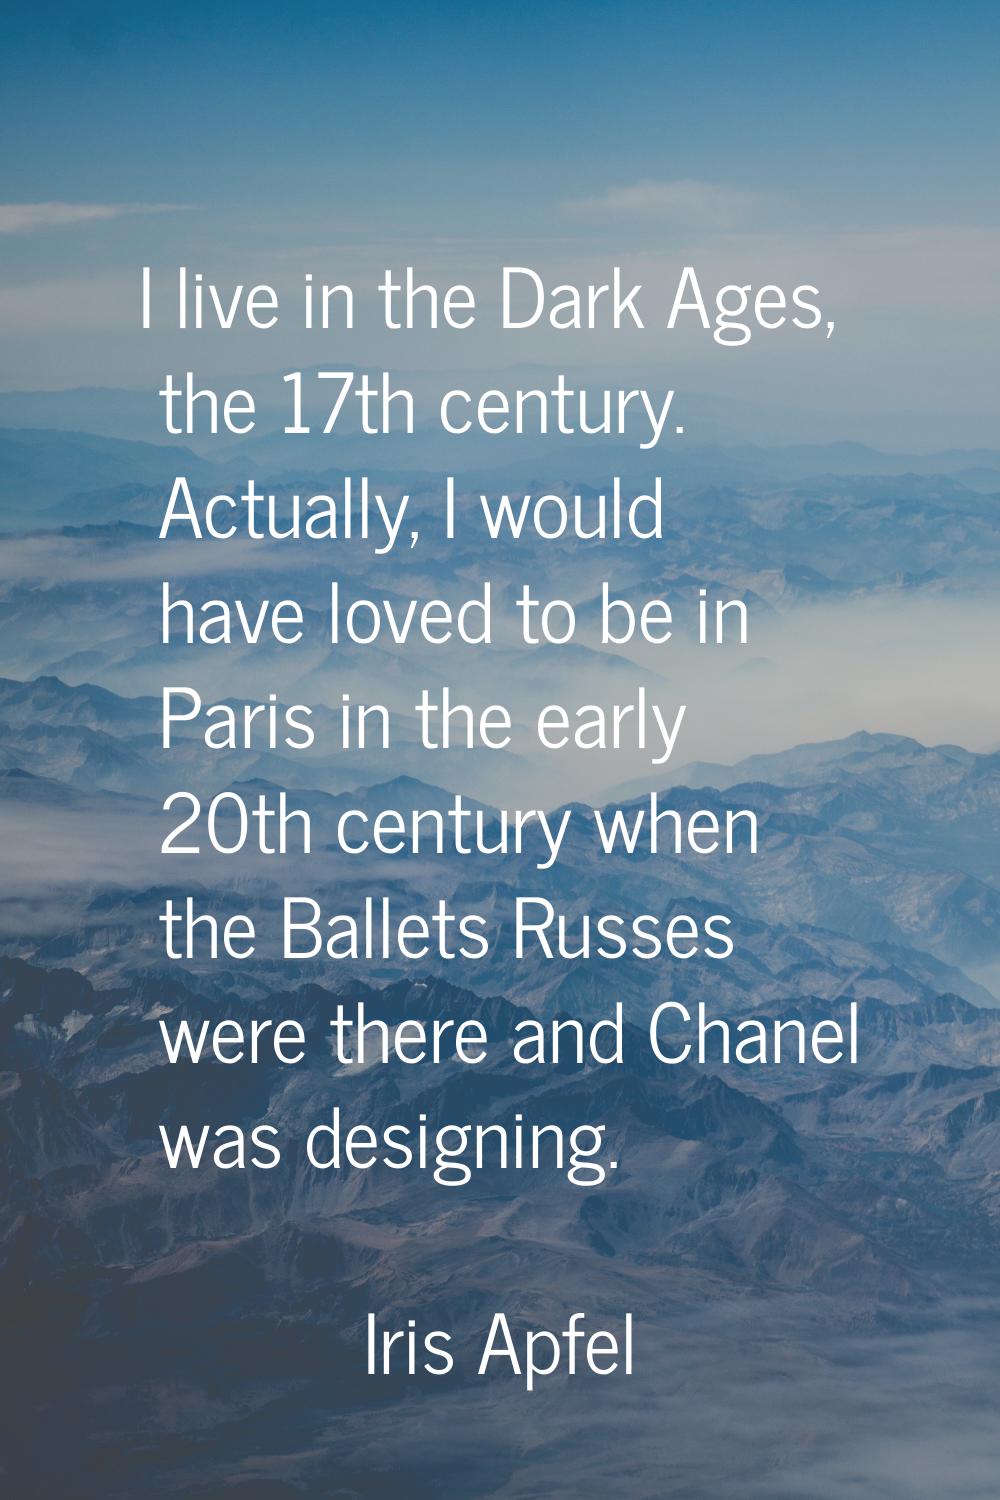 I live in the Dark Ages, the 17th century. Actually, I would have loved to be in Paris in the early